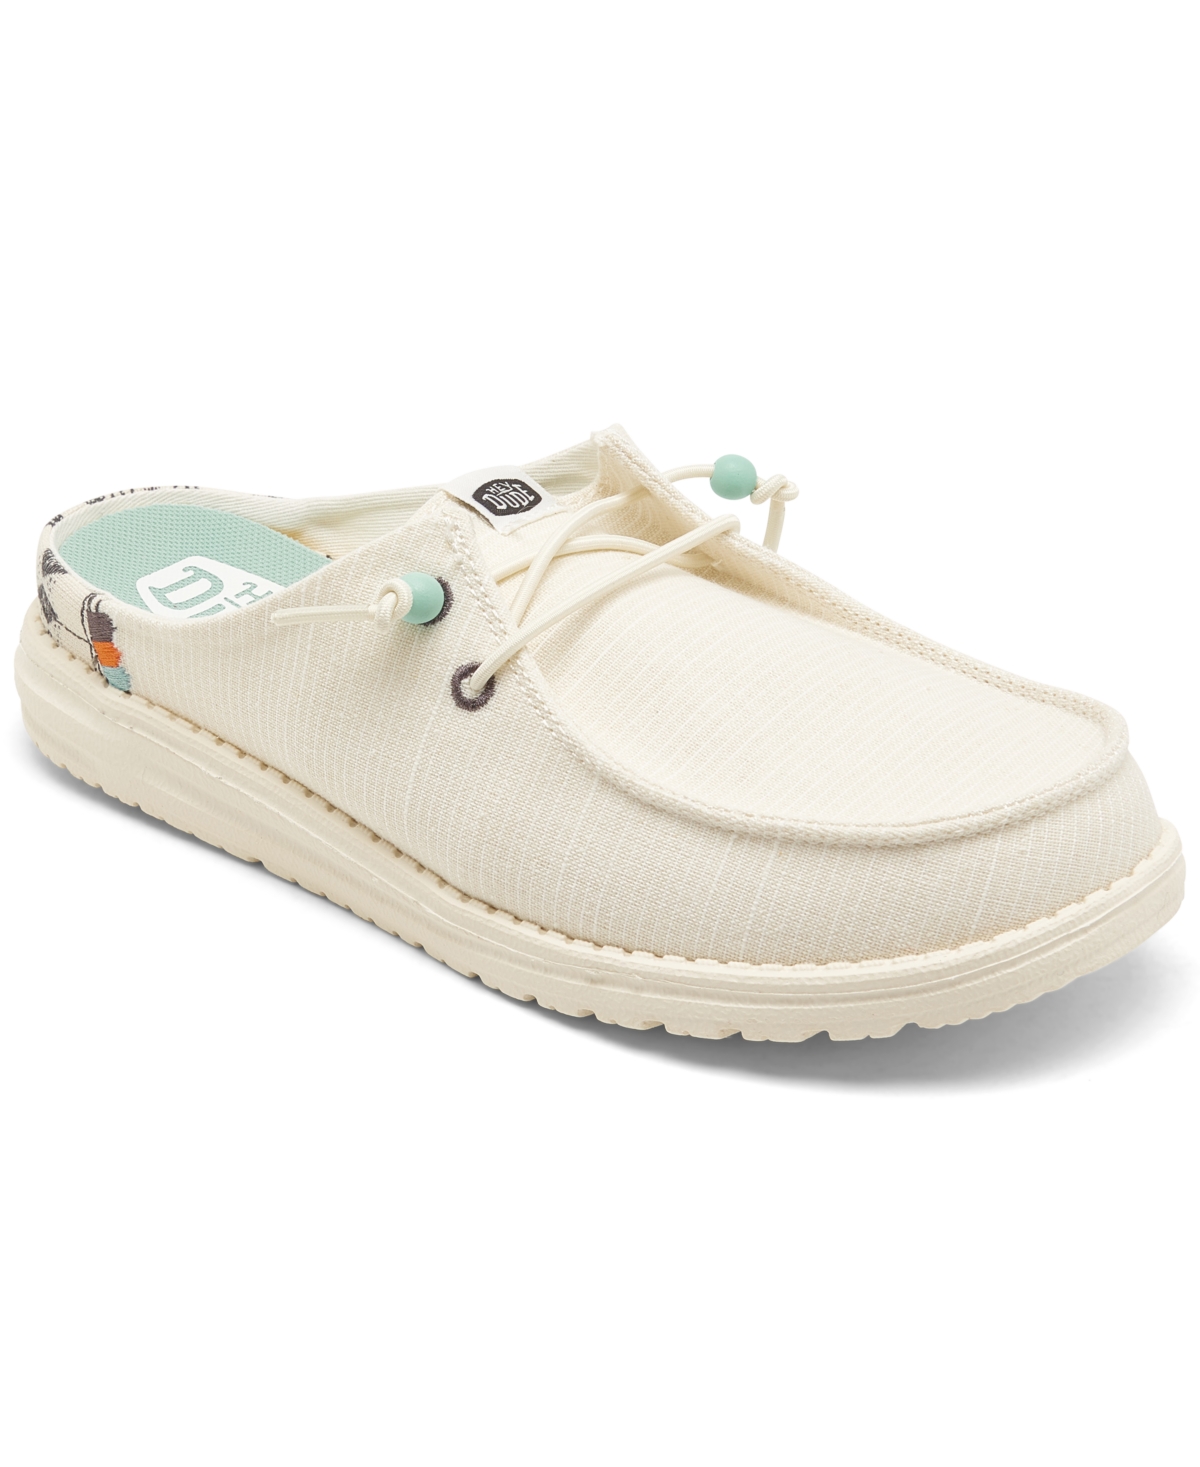 Women's Wendy Slip Classic Slip-On Casual Moccasin Sneakers from Finish Line - Tan/Multi